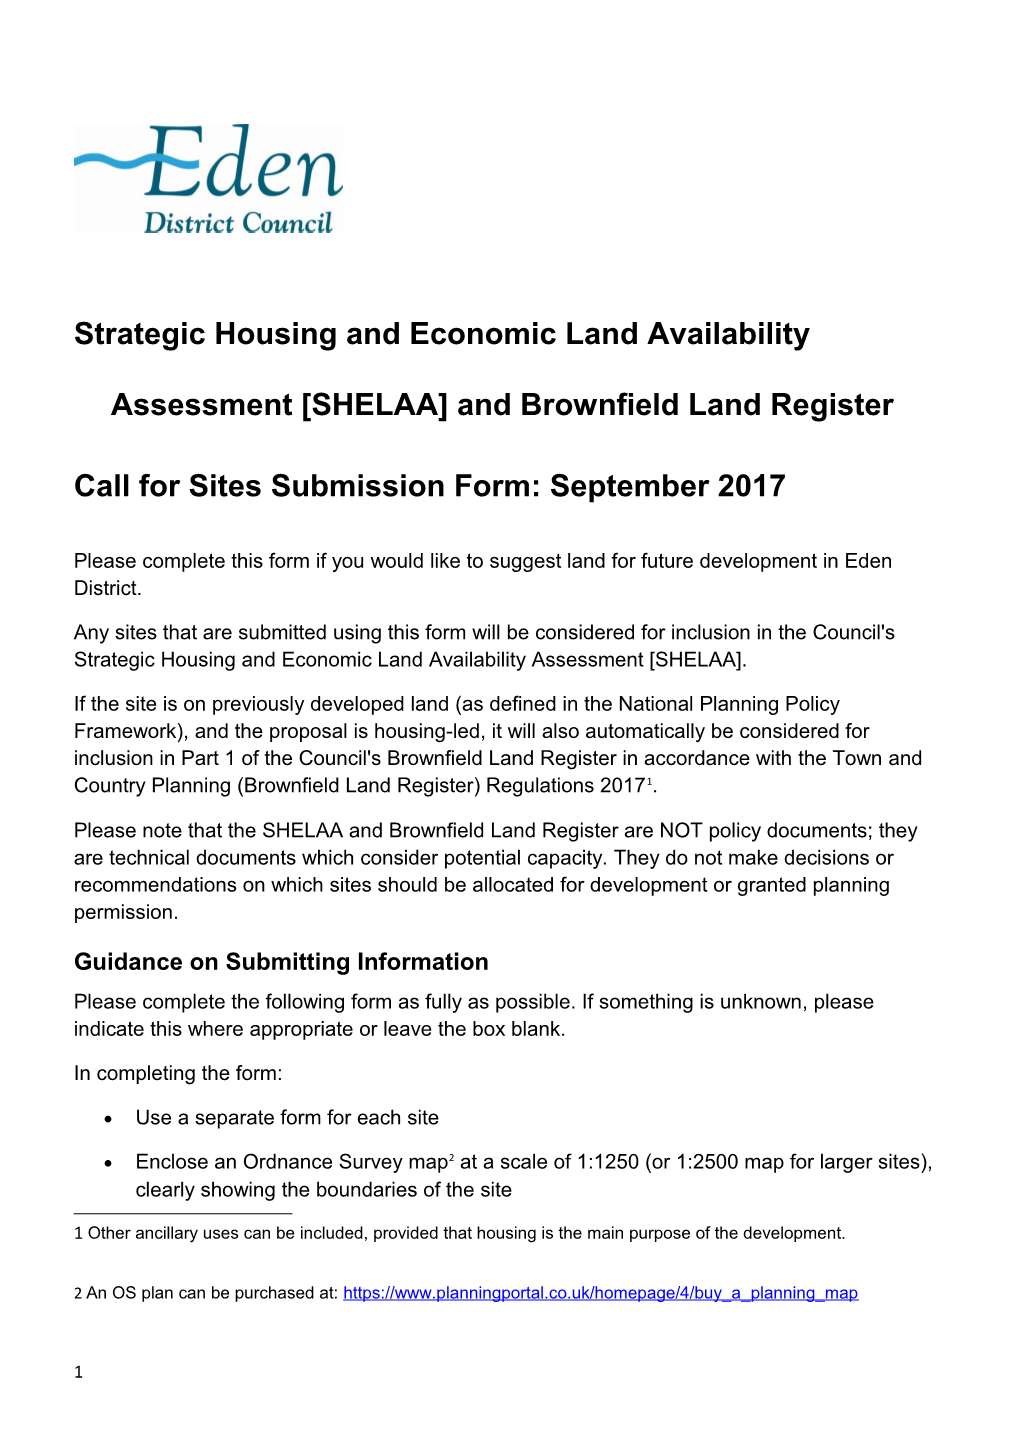 Strategic Housing and Economic Land Availability Assessment SHELAA and Brownfield Land Register